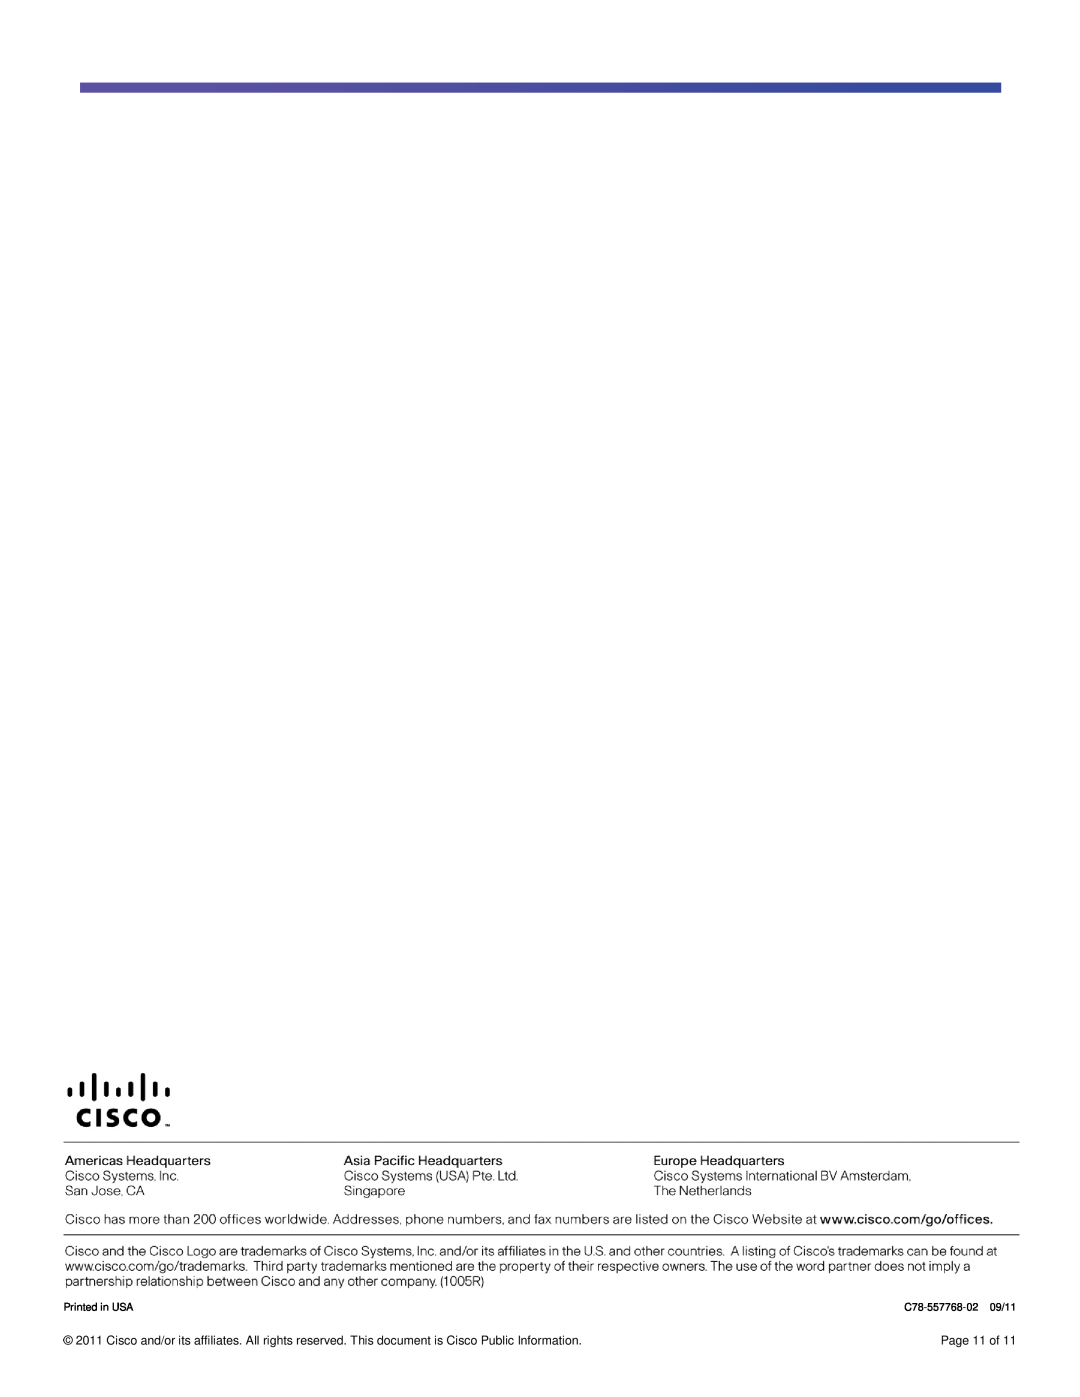 Cisco Systems UC540WFXOK9 manual Page 11 of, Printed in USA, C78-557768-02 09/11 